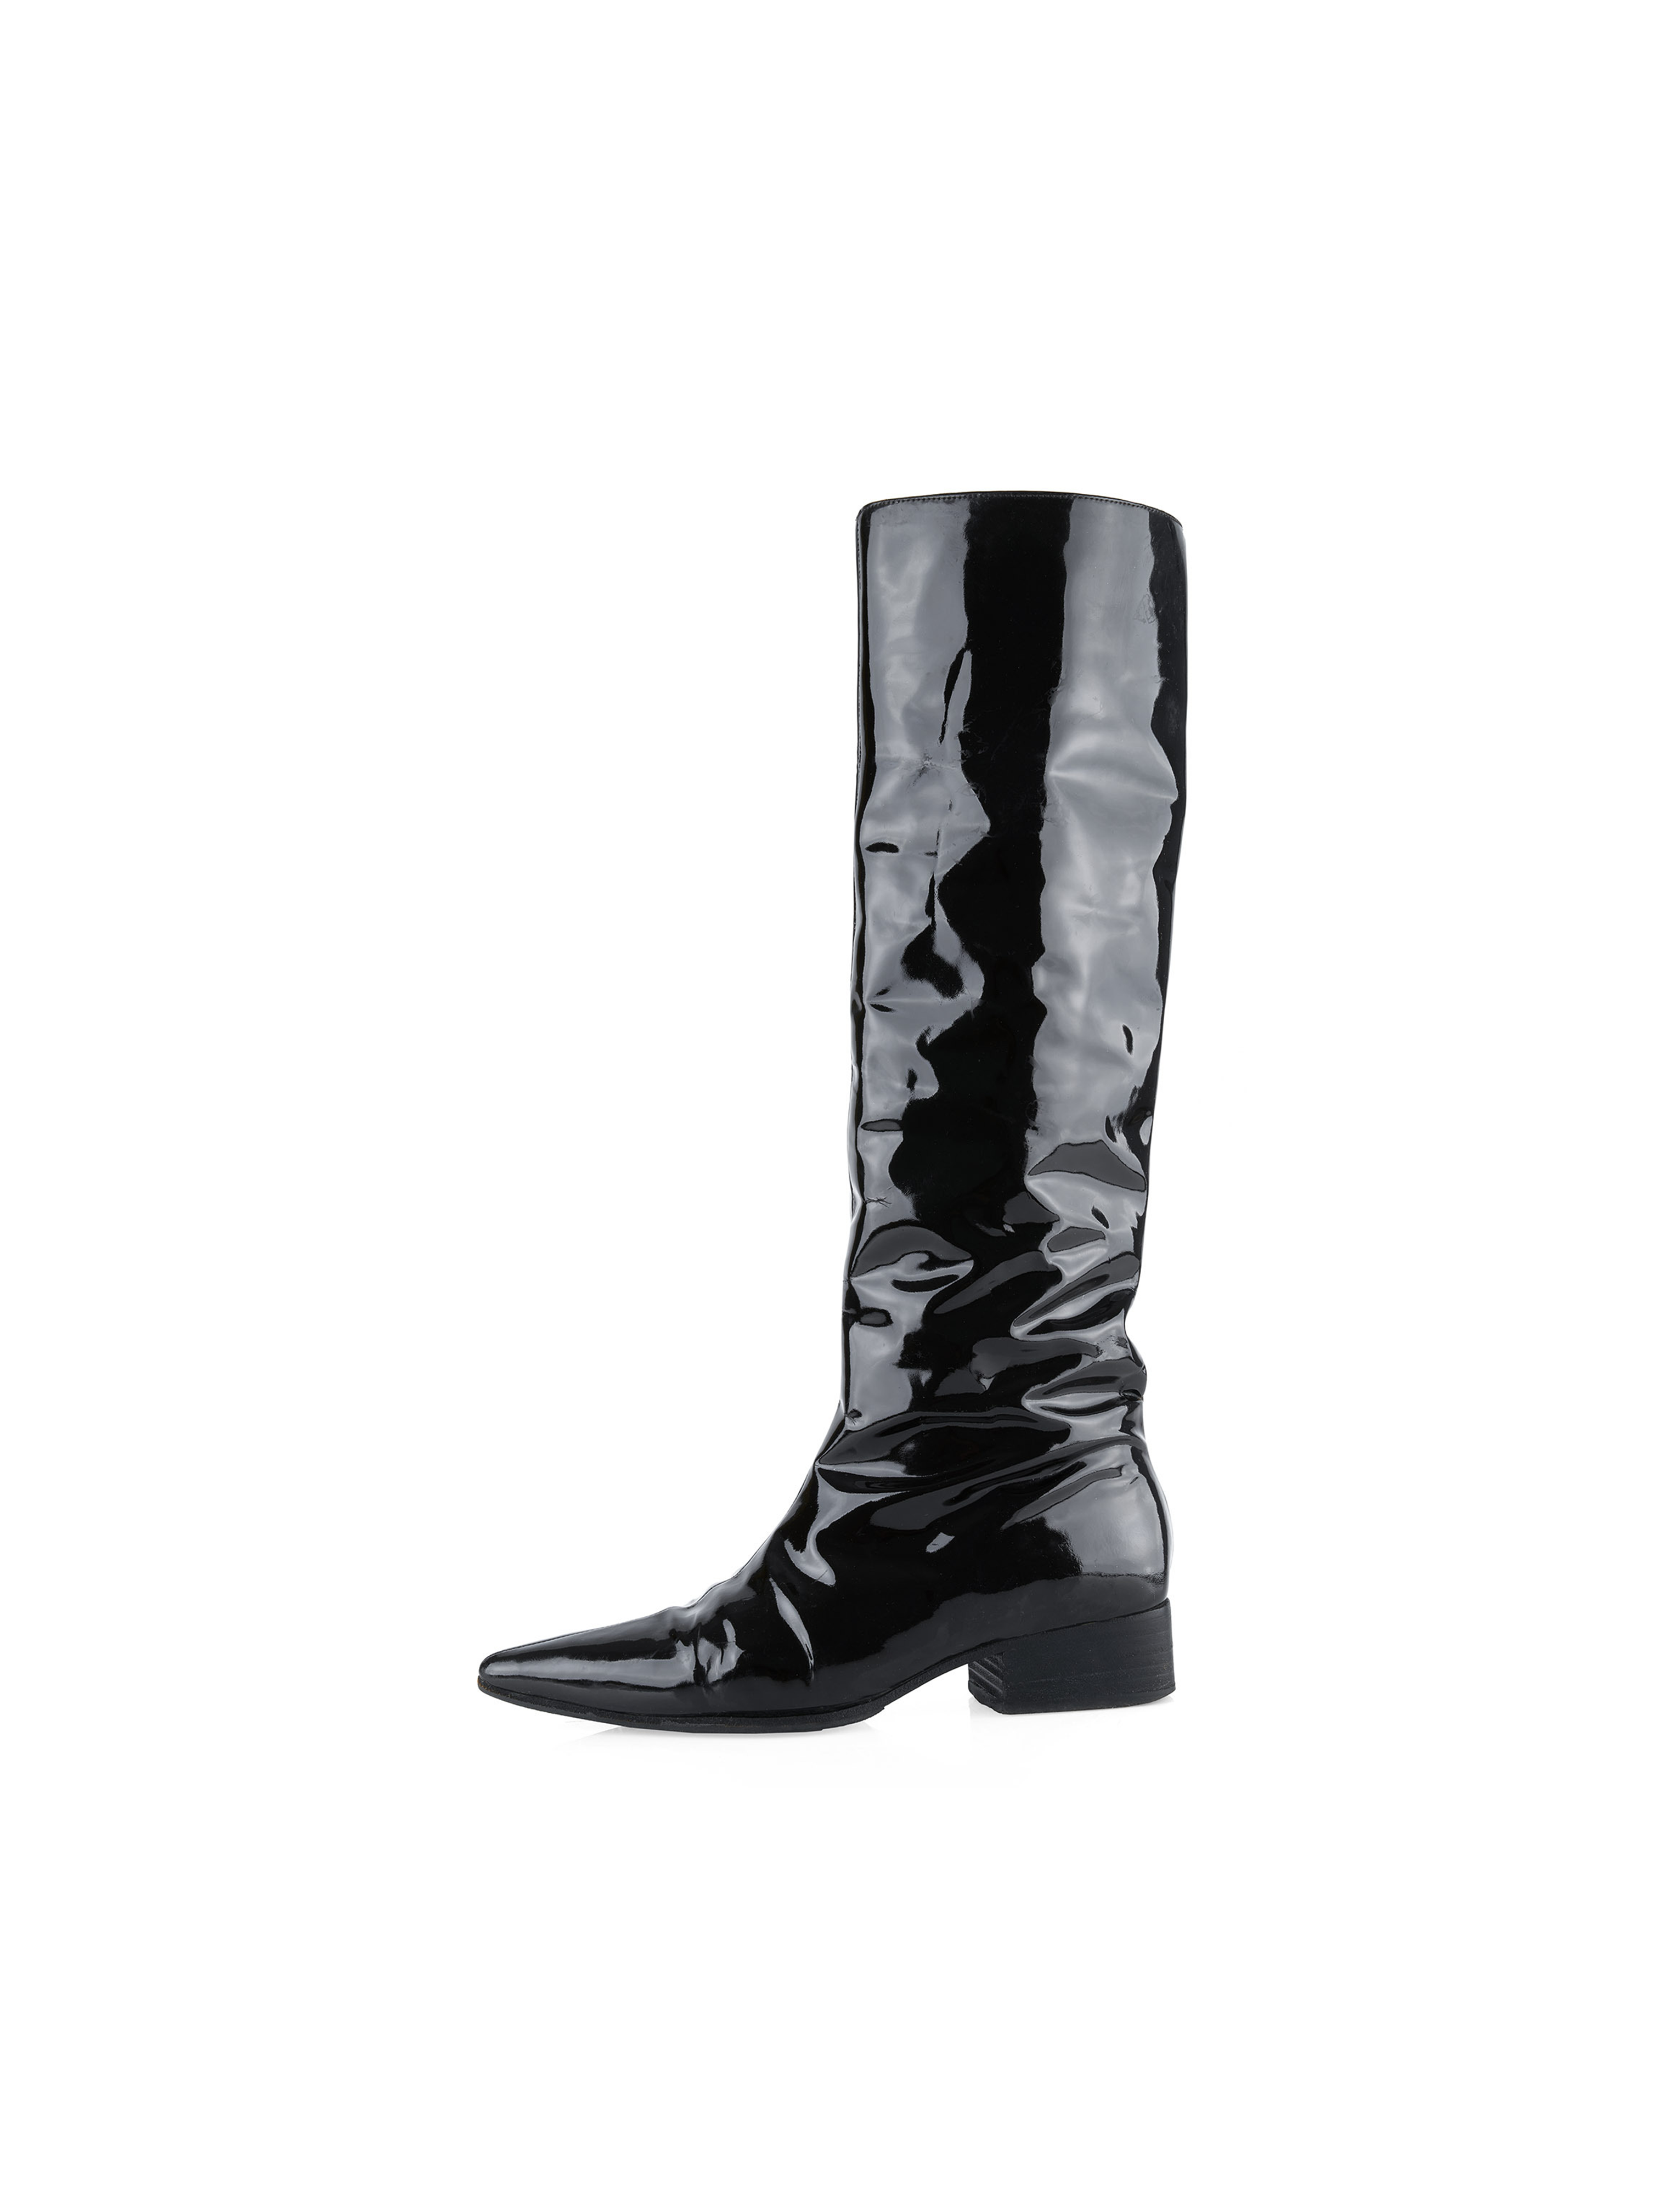 Gucci by Tom Ford Fall 1997 Black Patent Leather Knee-high Boots · INTO